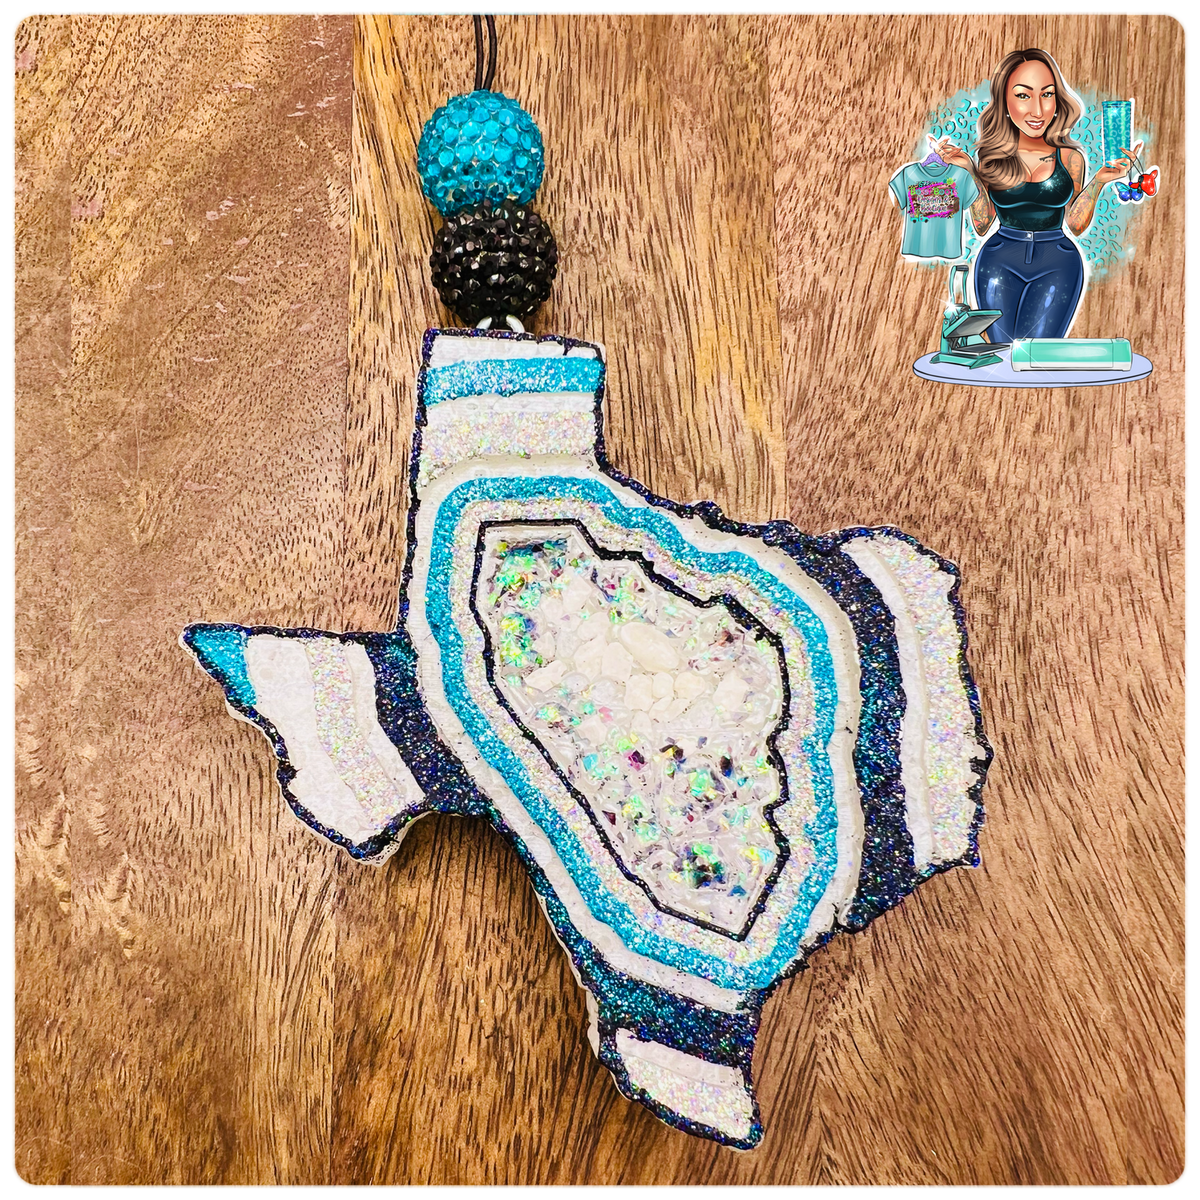 3D Solid Geode Texas – BossyBootsDesigns